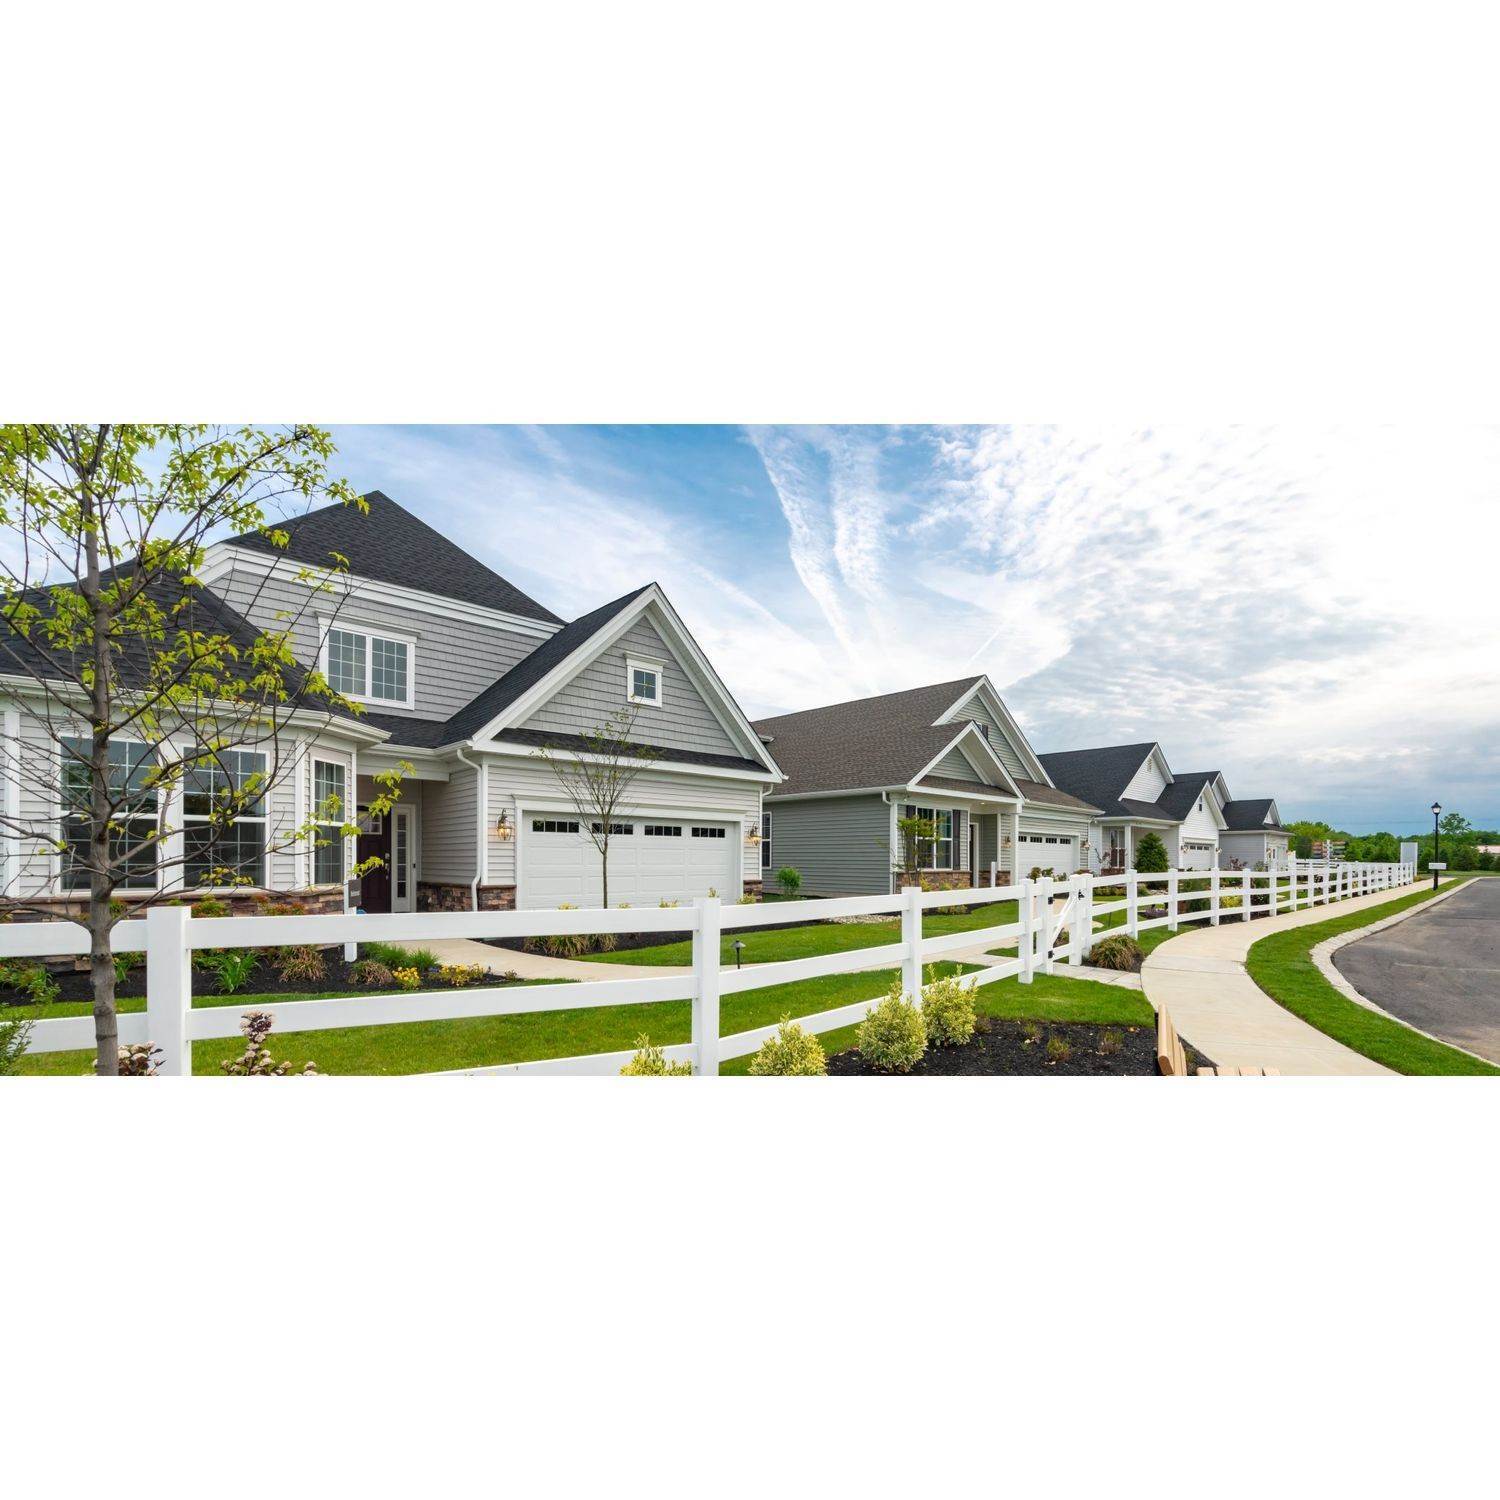 3. Venue at Longview - Single Family Homes建於 8 Province Line Road, Plumsted Township, NJ 08533